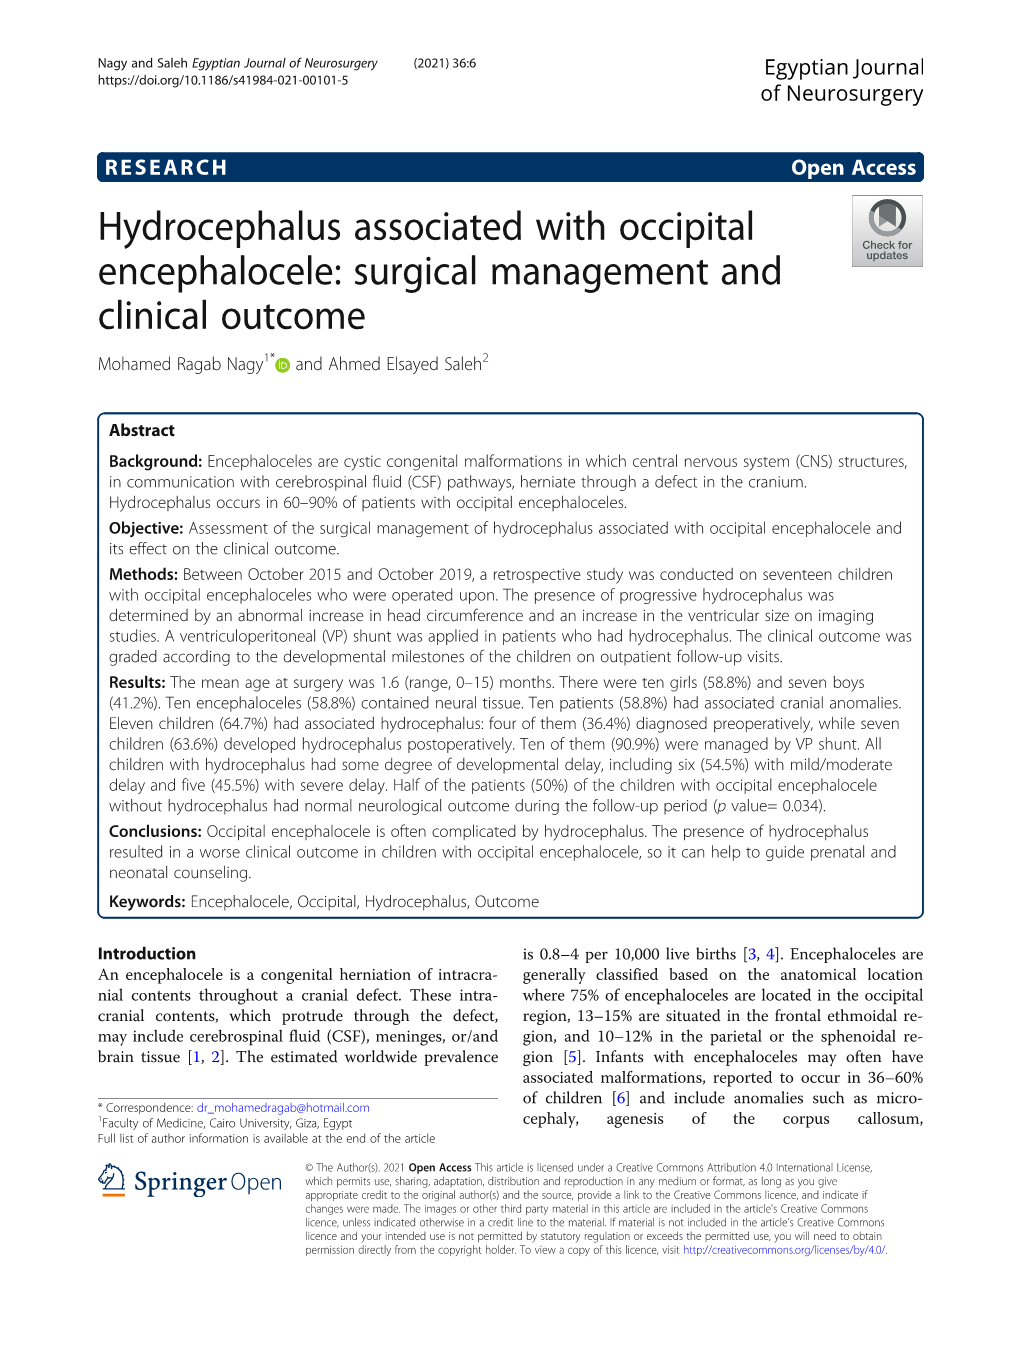 Hydrocephalus Associated with Occipital Encephalocele: Surgical Management and Clinical Outcome Mohamed Ragab Nagy1* and Ahmed Elsayed Saleh2